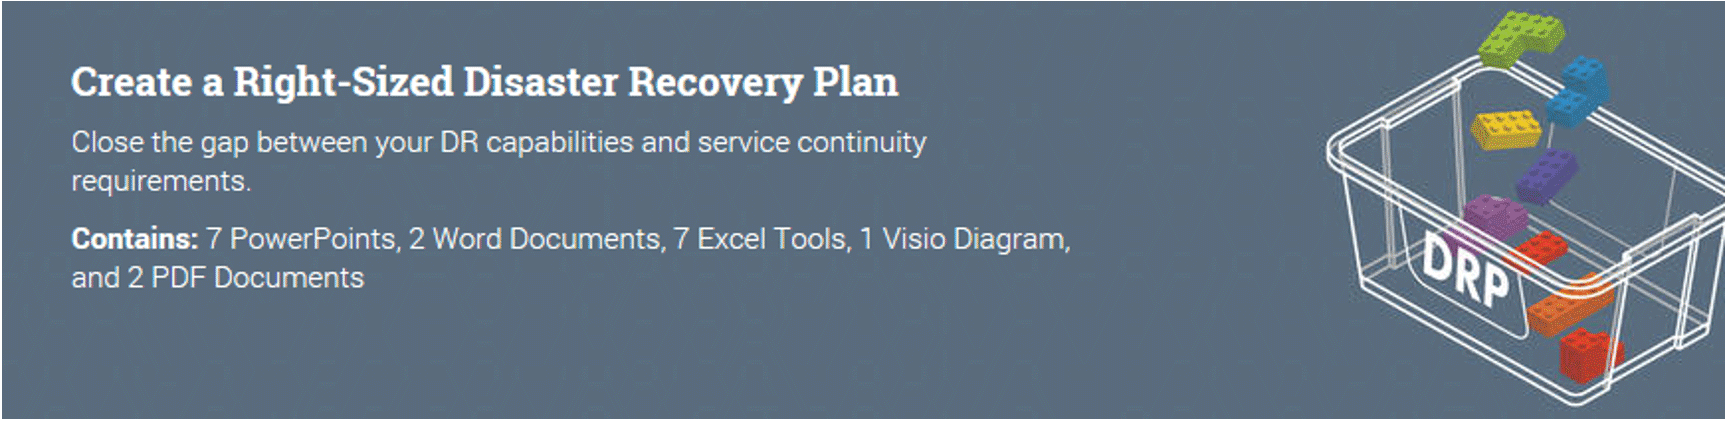 Short description of Info-Tech blueprint 'Create a Right-Sized Disaster Recovery Plan'.